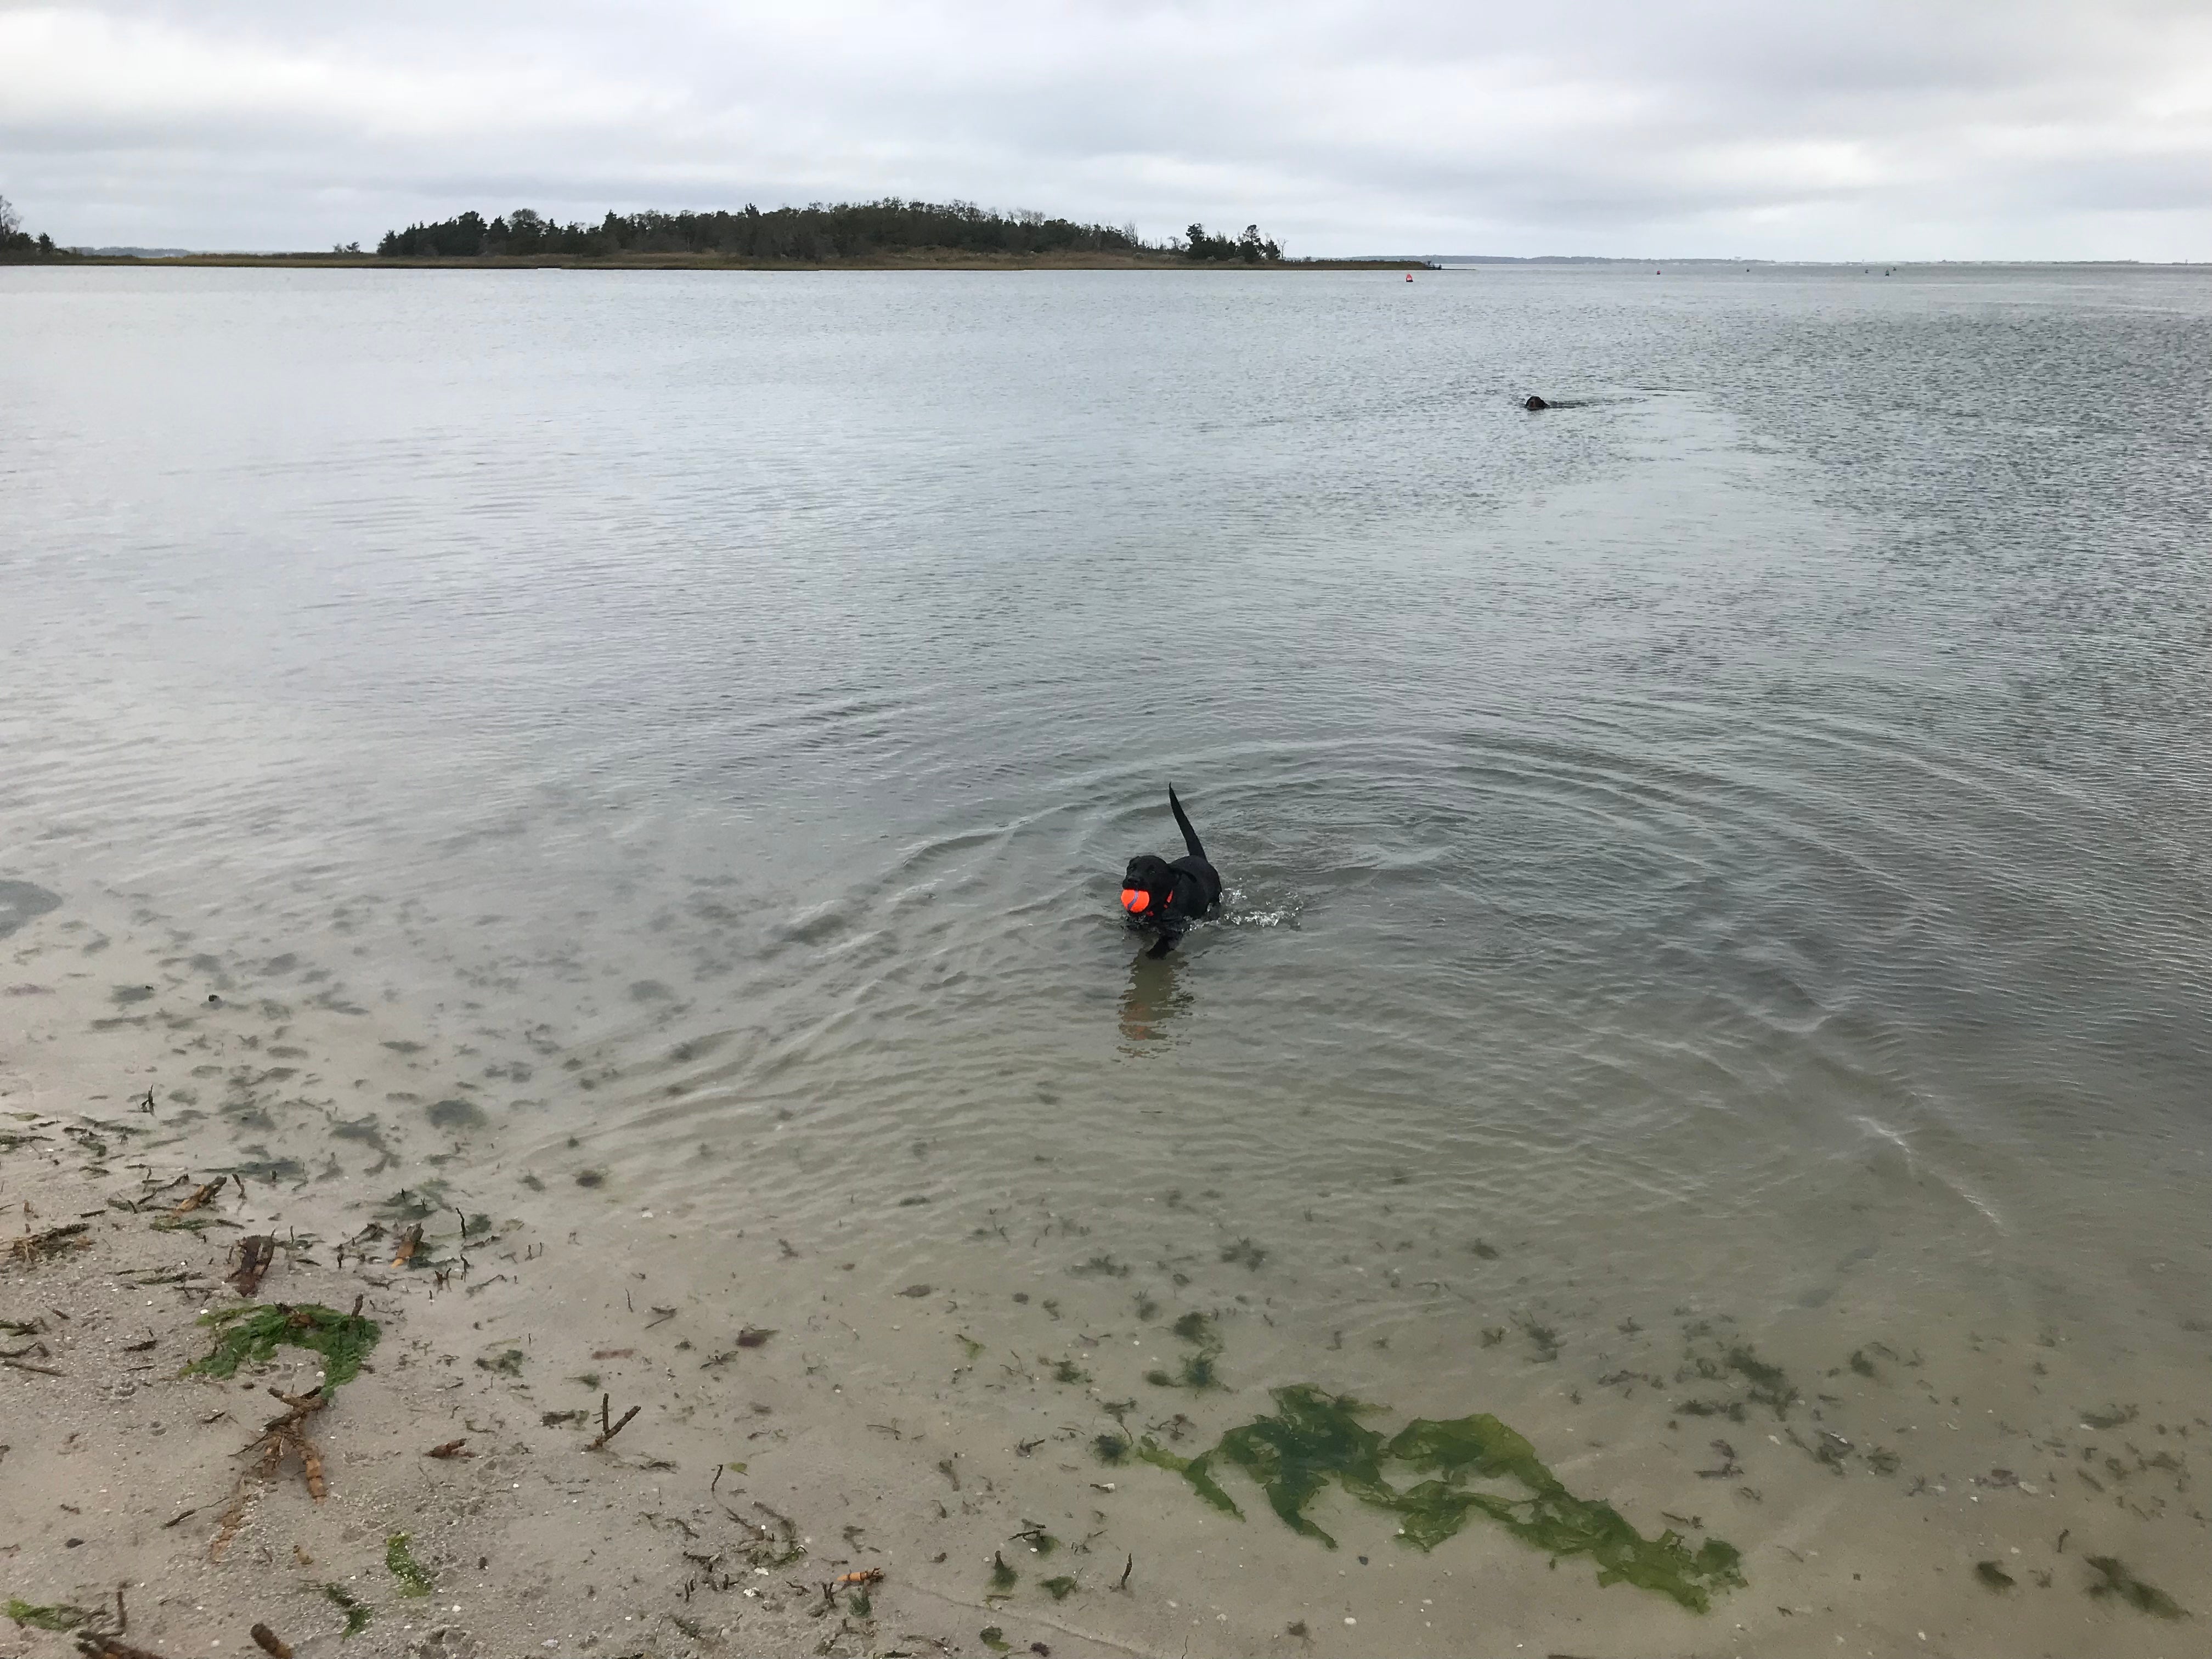 Our puppy learning to swim at the dog beach Sept 2017